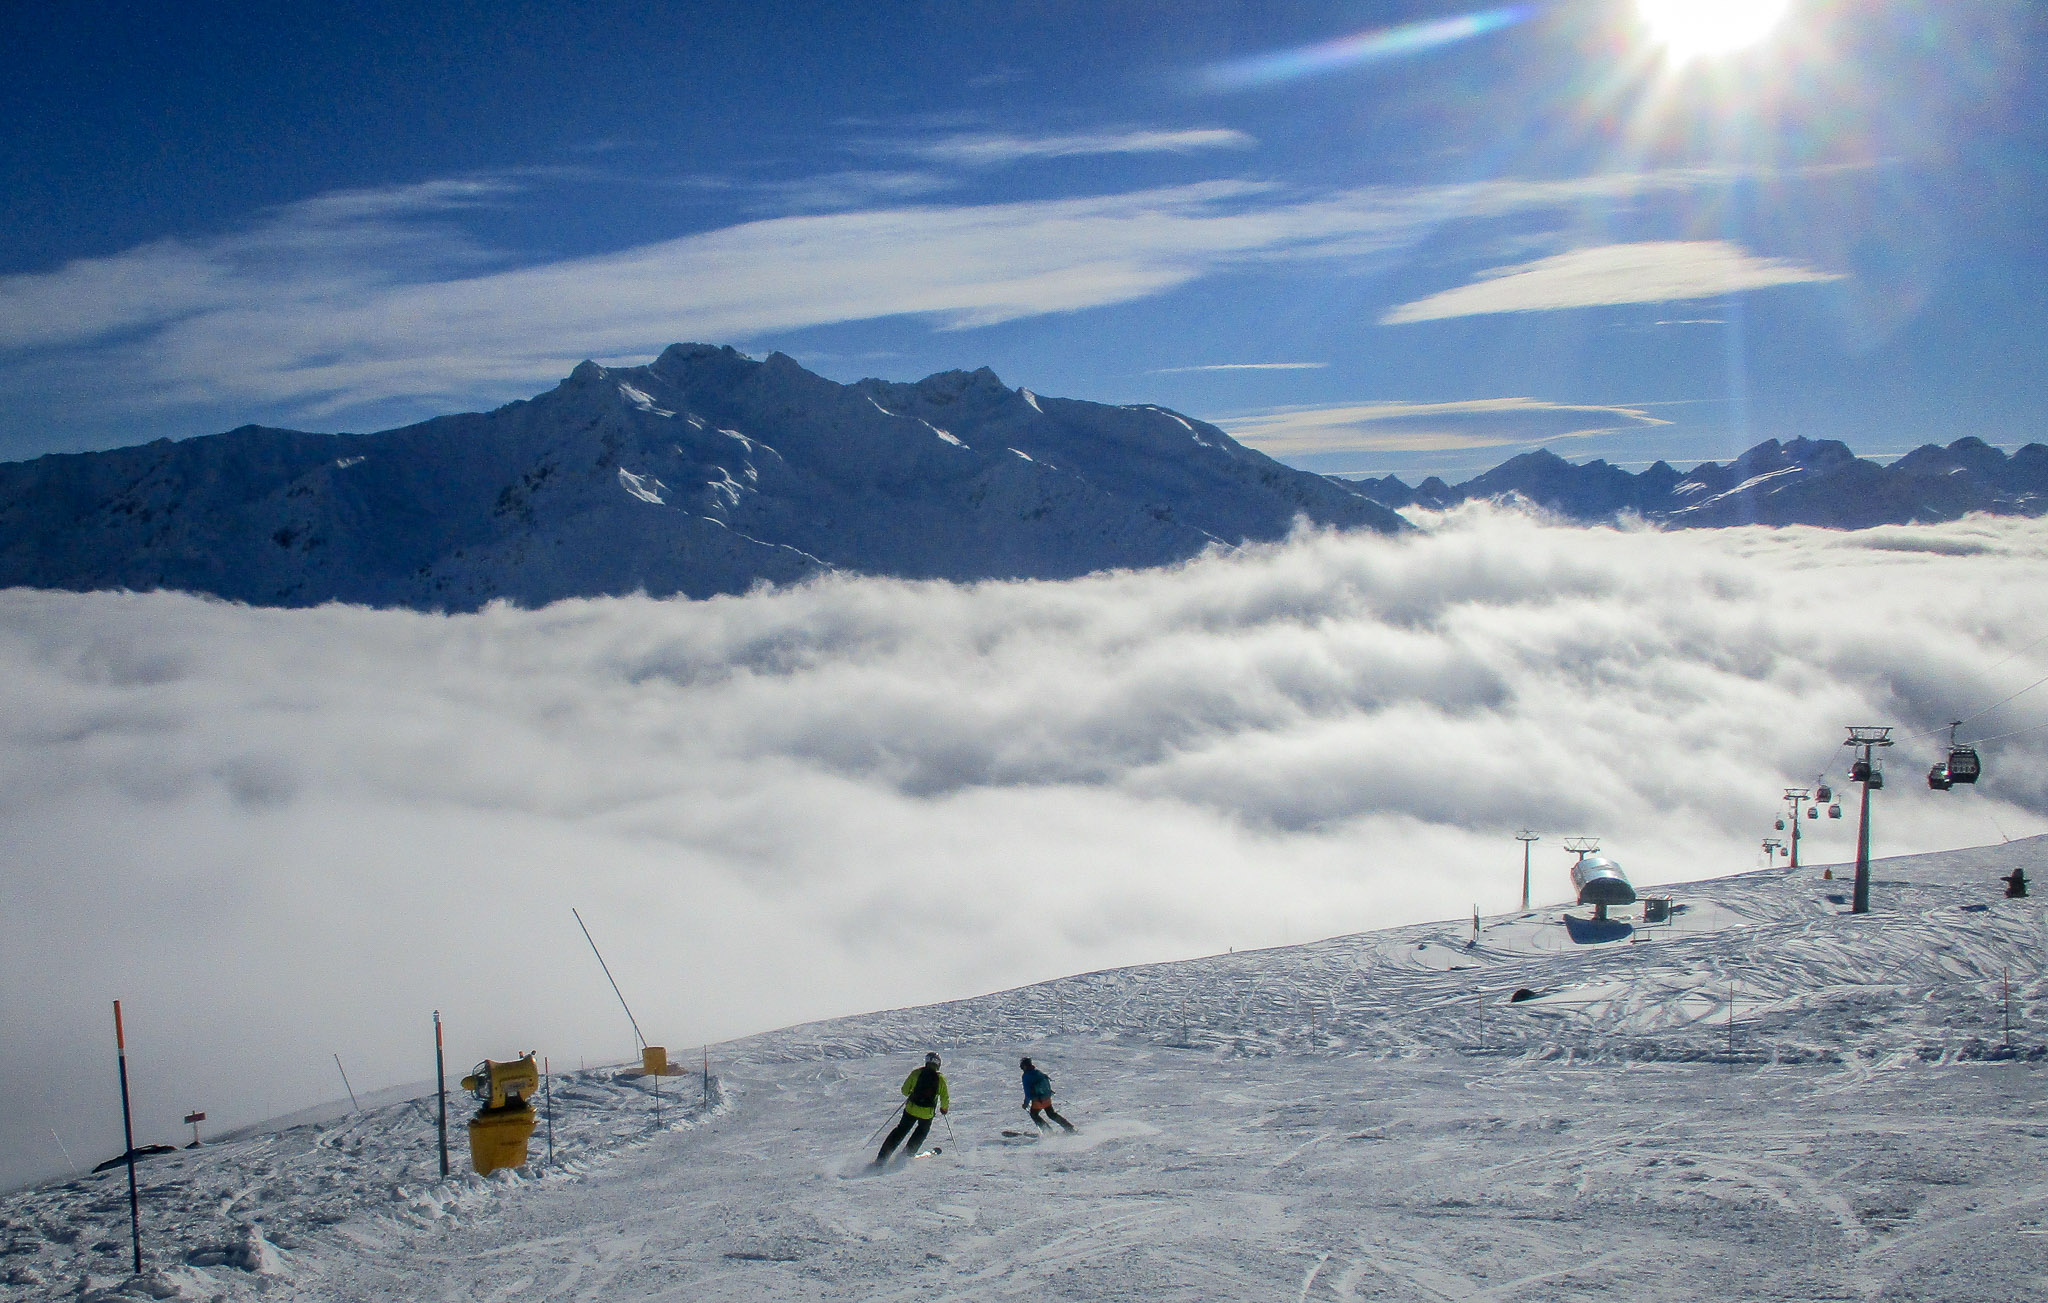 Above the clouds, Andermatt